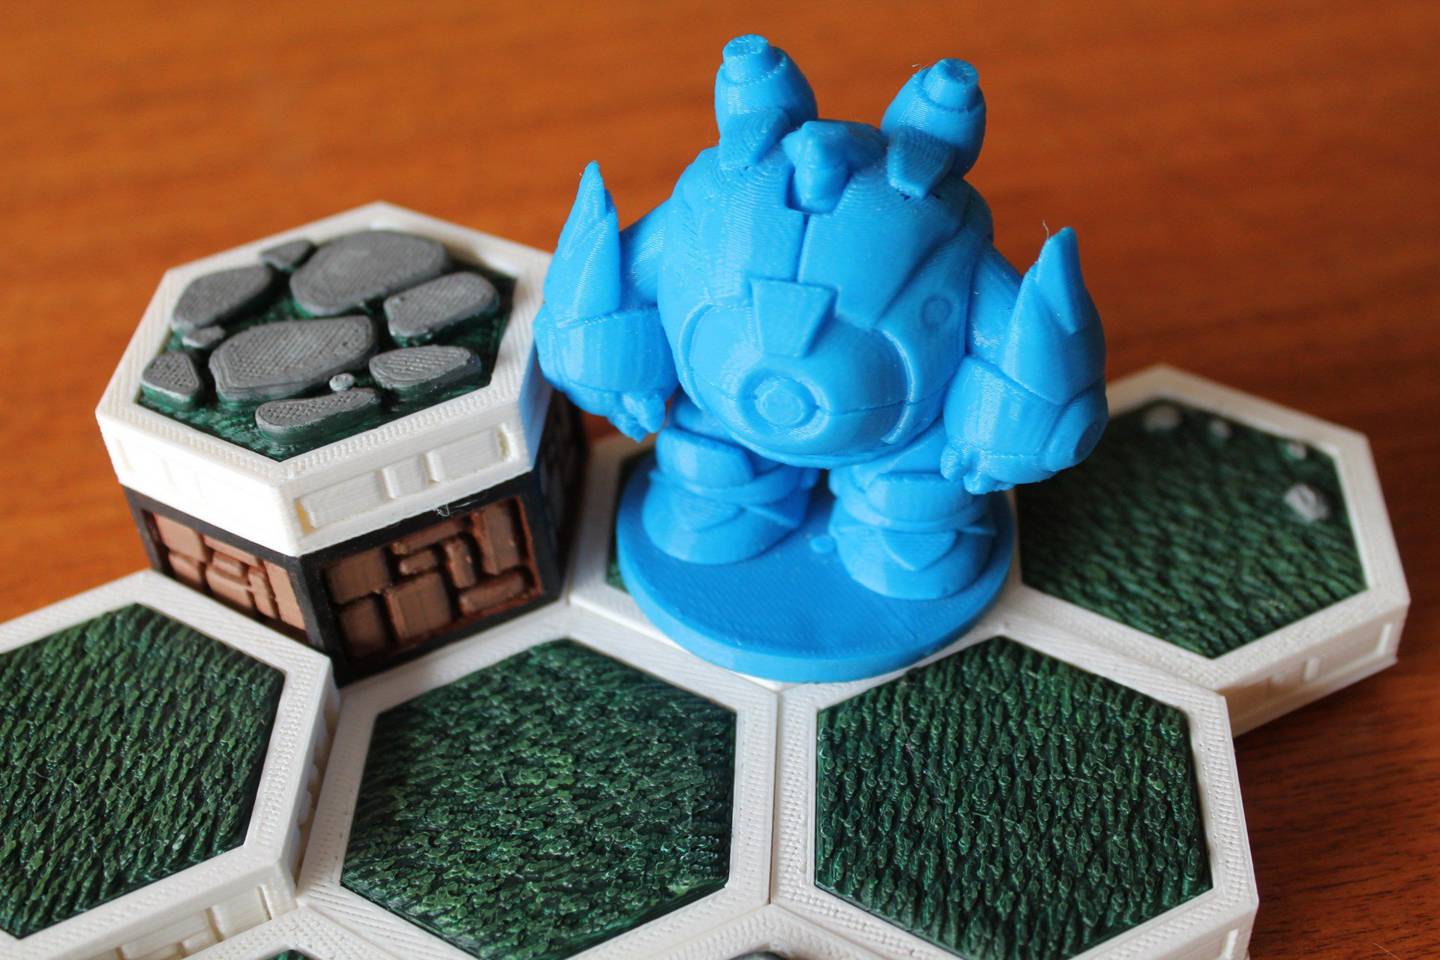 3D print your own tabletop board games WIRED UK